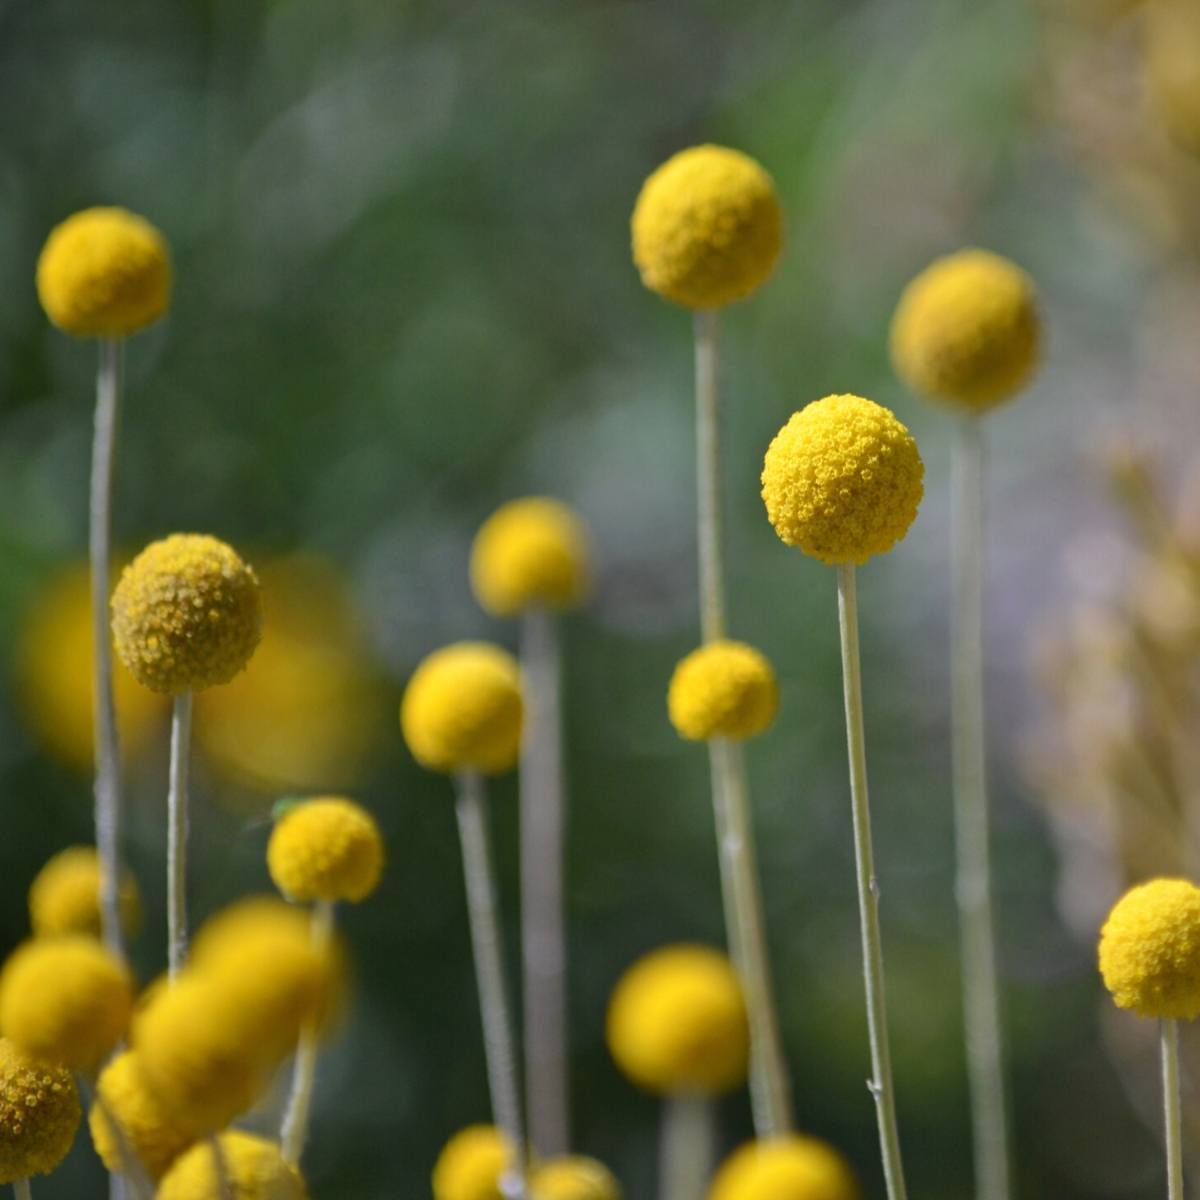 Billy Buttons Seeds The Seed Collection